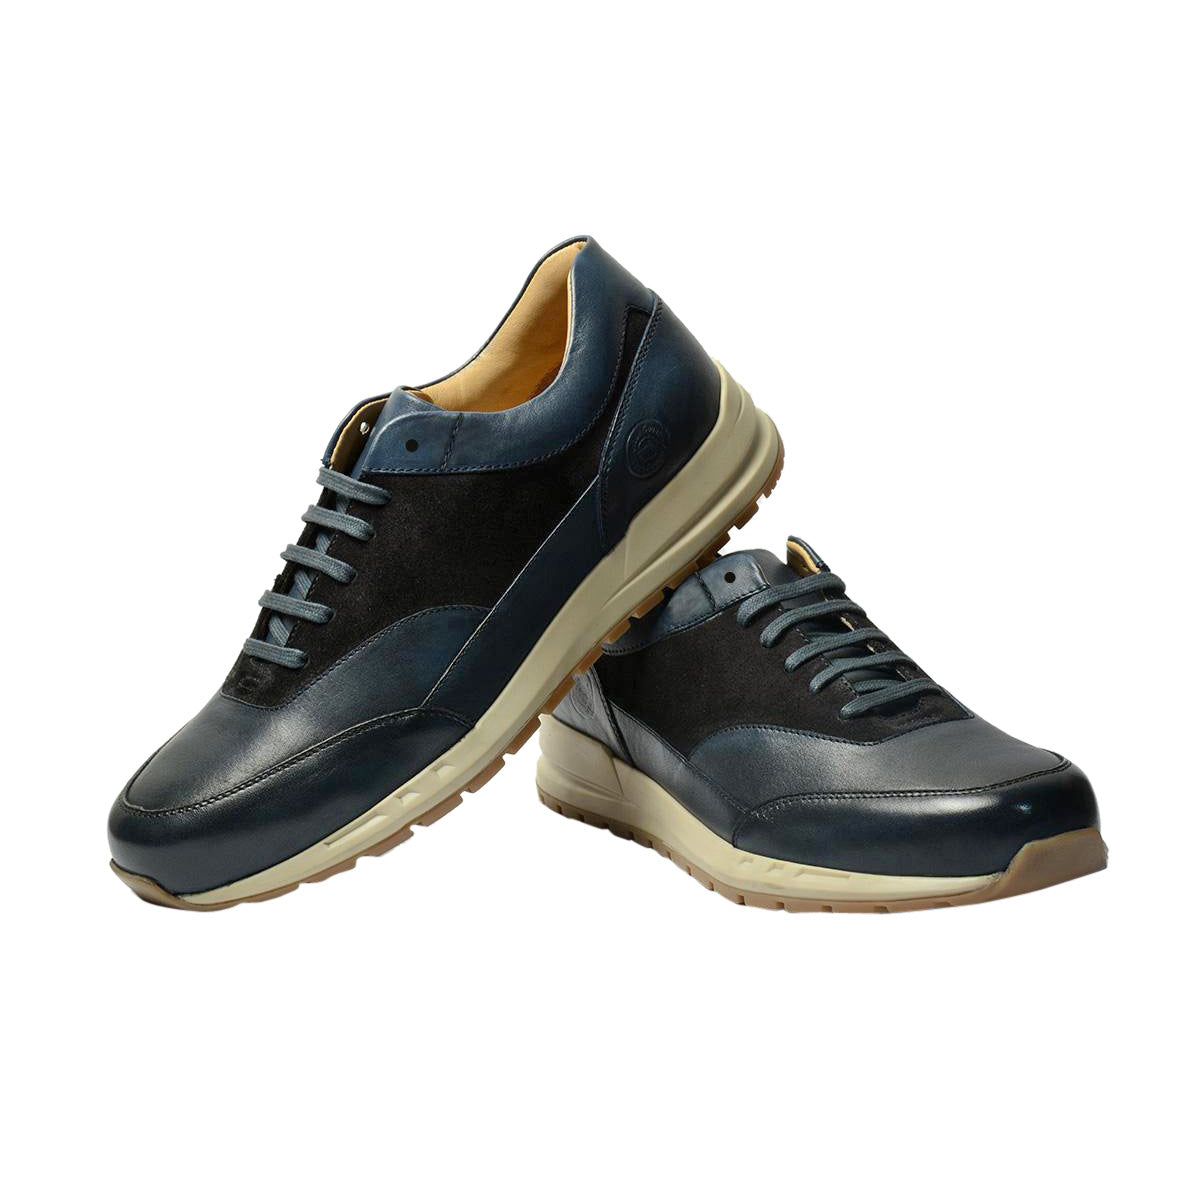 Men Leather Casual Sneakers ǀ Presence 6381